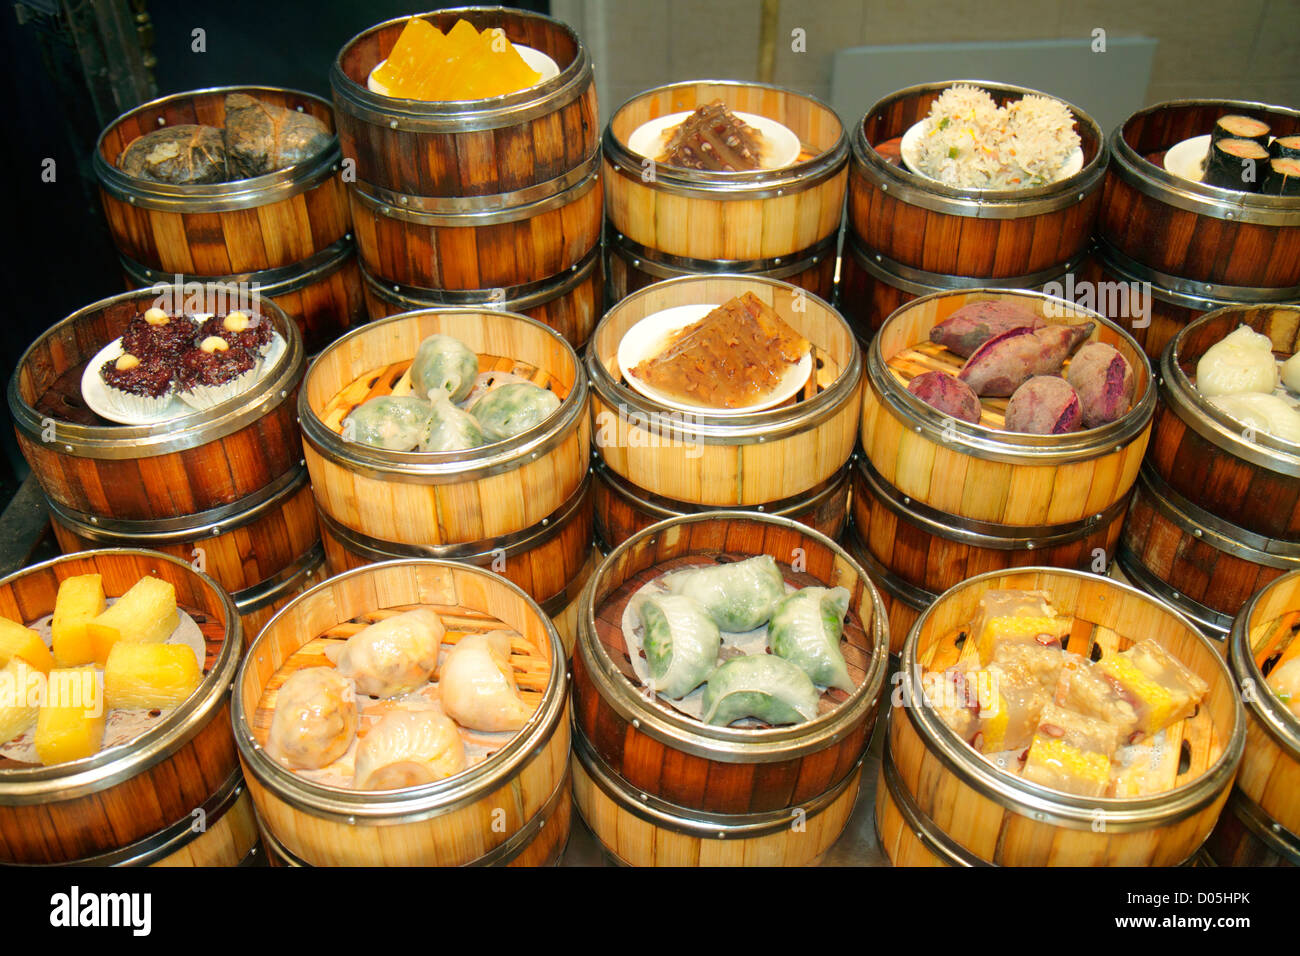 Shanghai China,Chinese Huangpu District,Sichuan Road,restaurant restaurants food dining cafe cafes,food display sale bamboo steamer,China121003192 Stock Photo